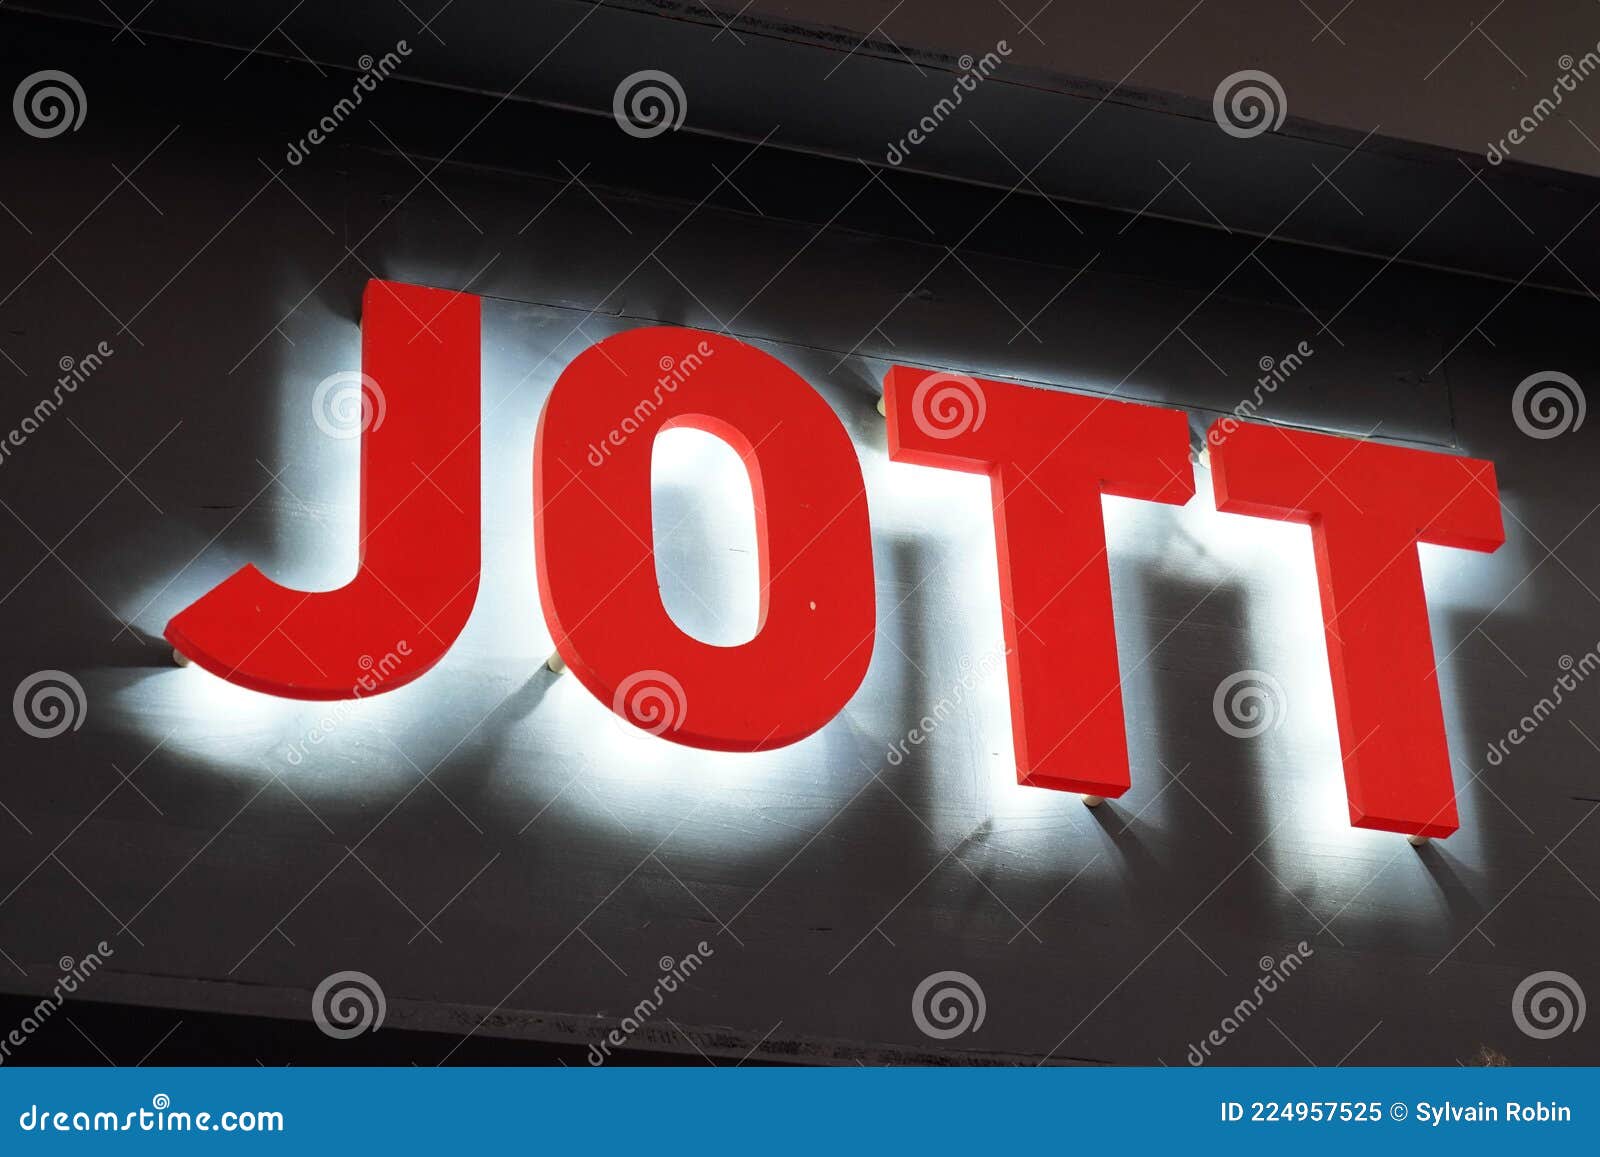 Jott Just Over the Top Store Text Brand and Logo Sign French Shop Chain ...